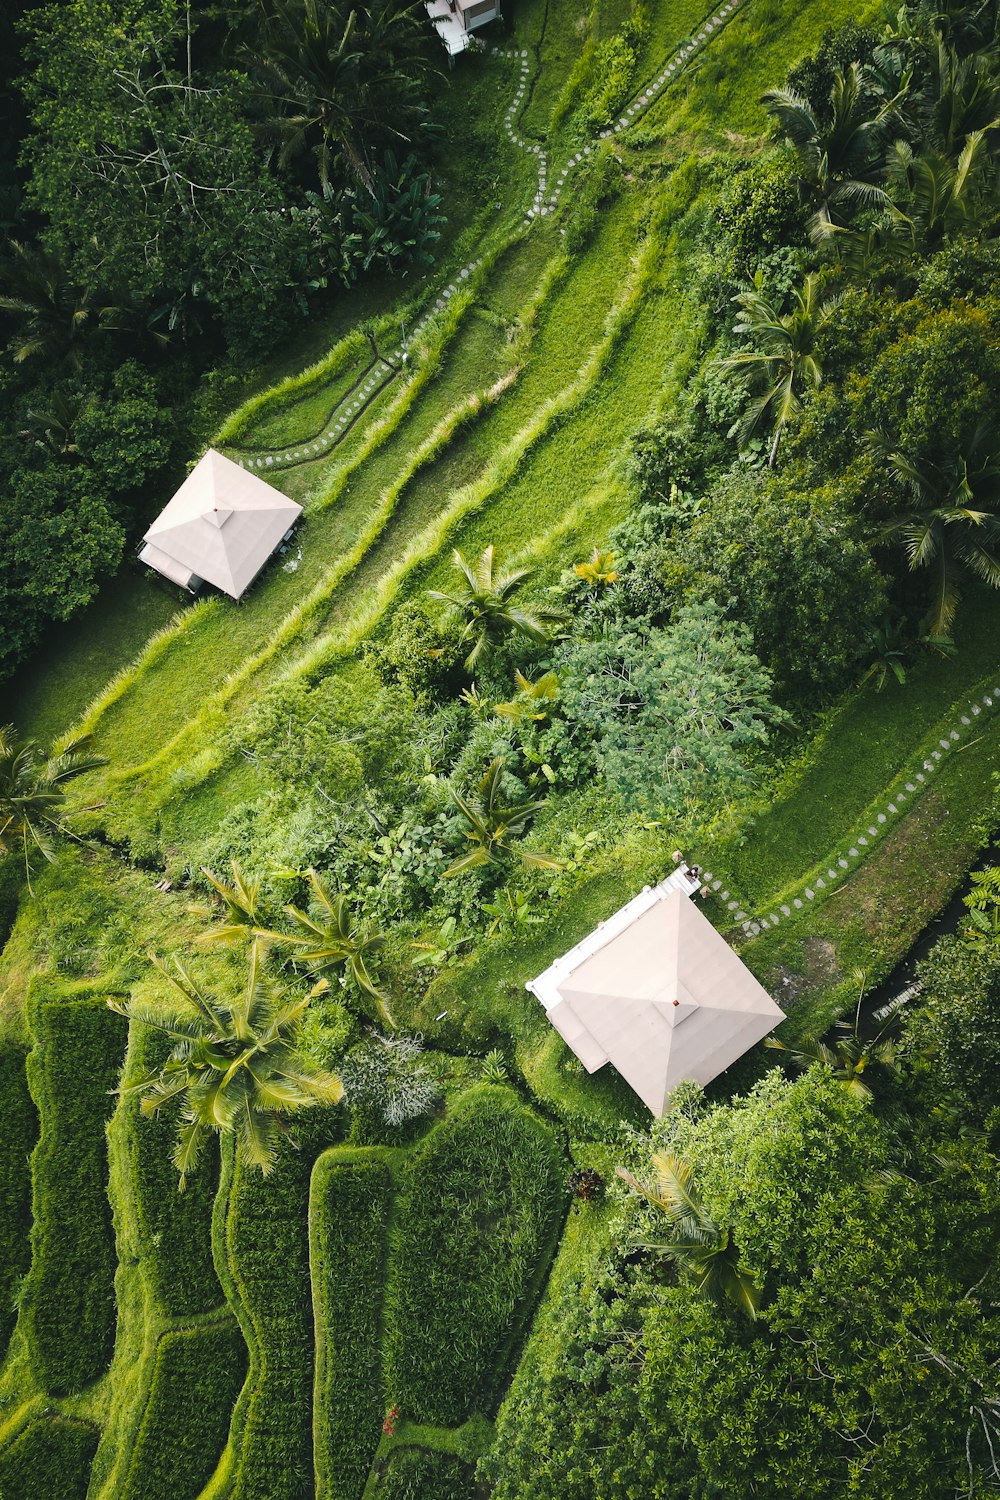 an aerial view of two tents in a lush green field